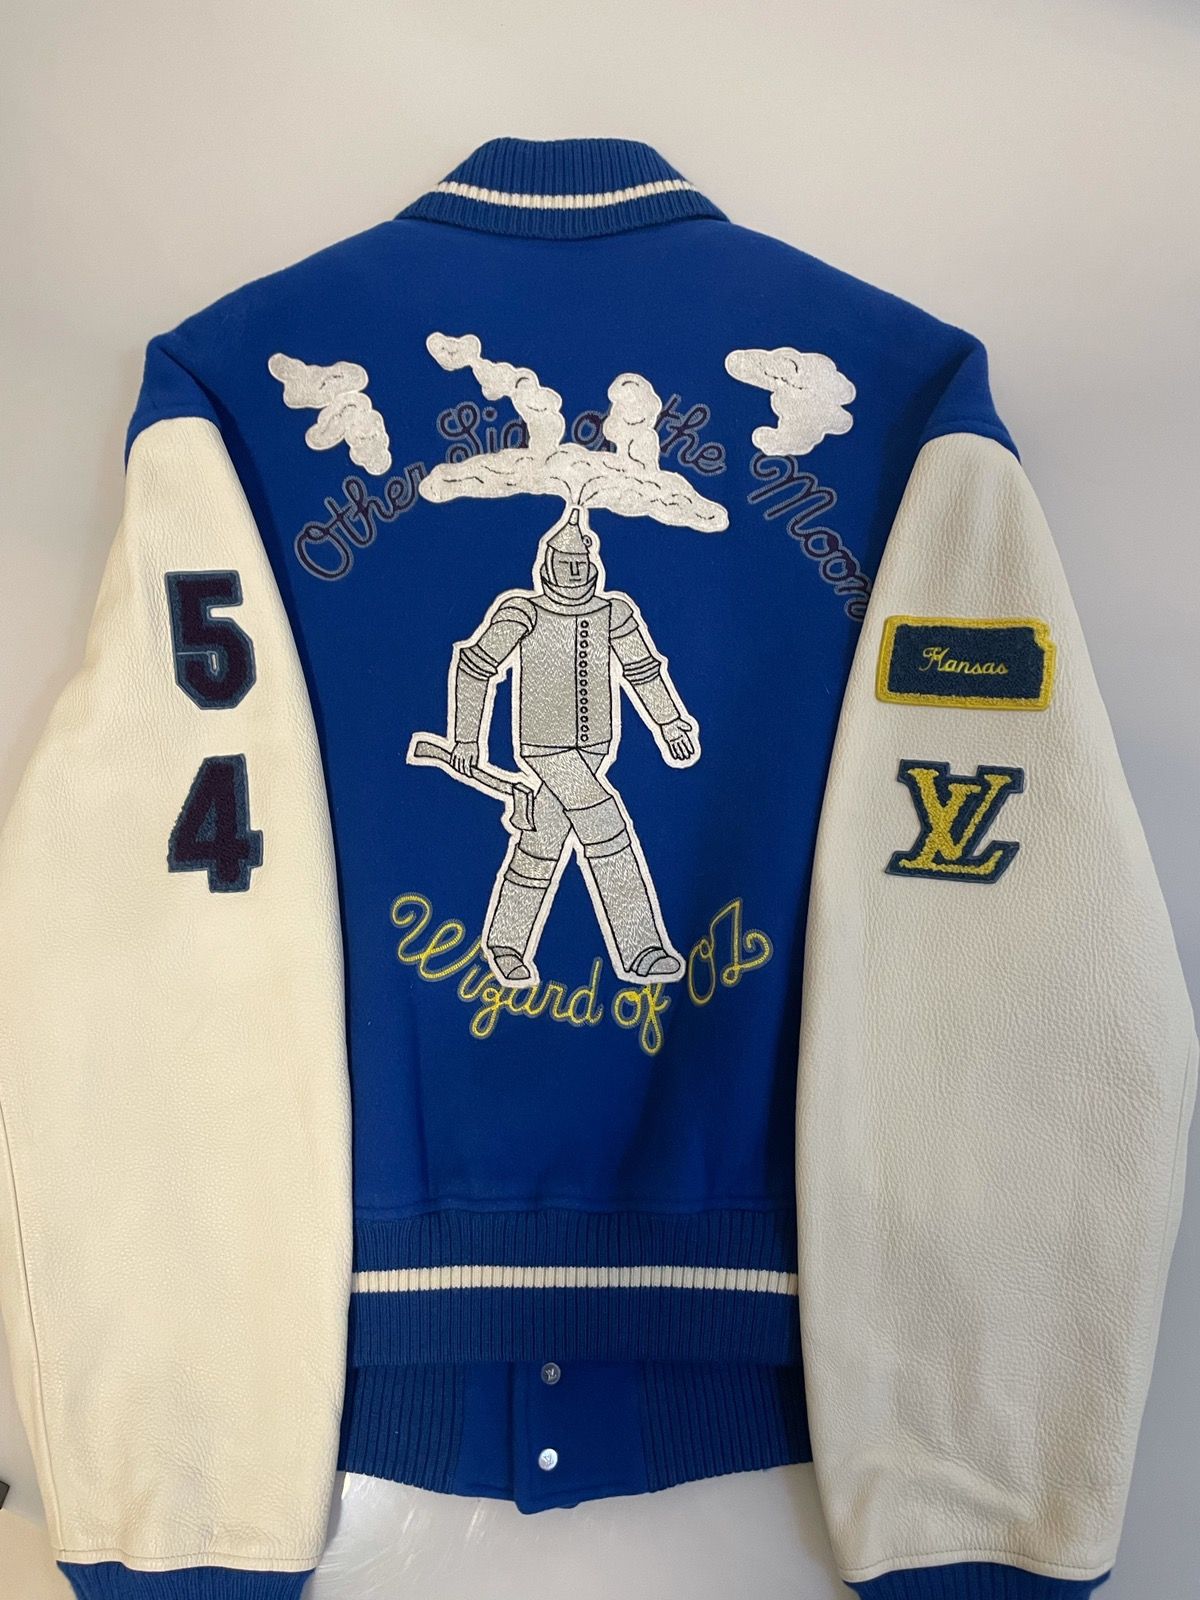 Louis Vuitton “Plain Rainbow“ Wizard of OZ Varsity by Virgil Abloh (2019)  “One of the most coveted pieces from Virgil Abloh's time at…